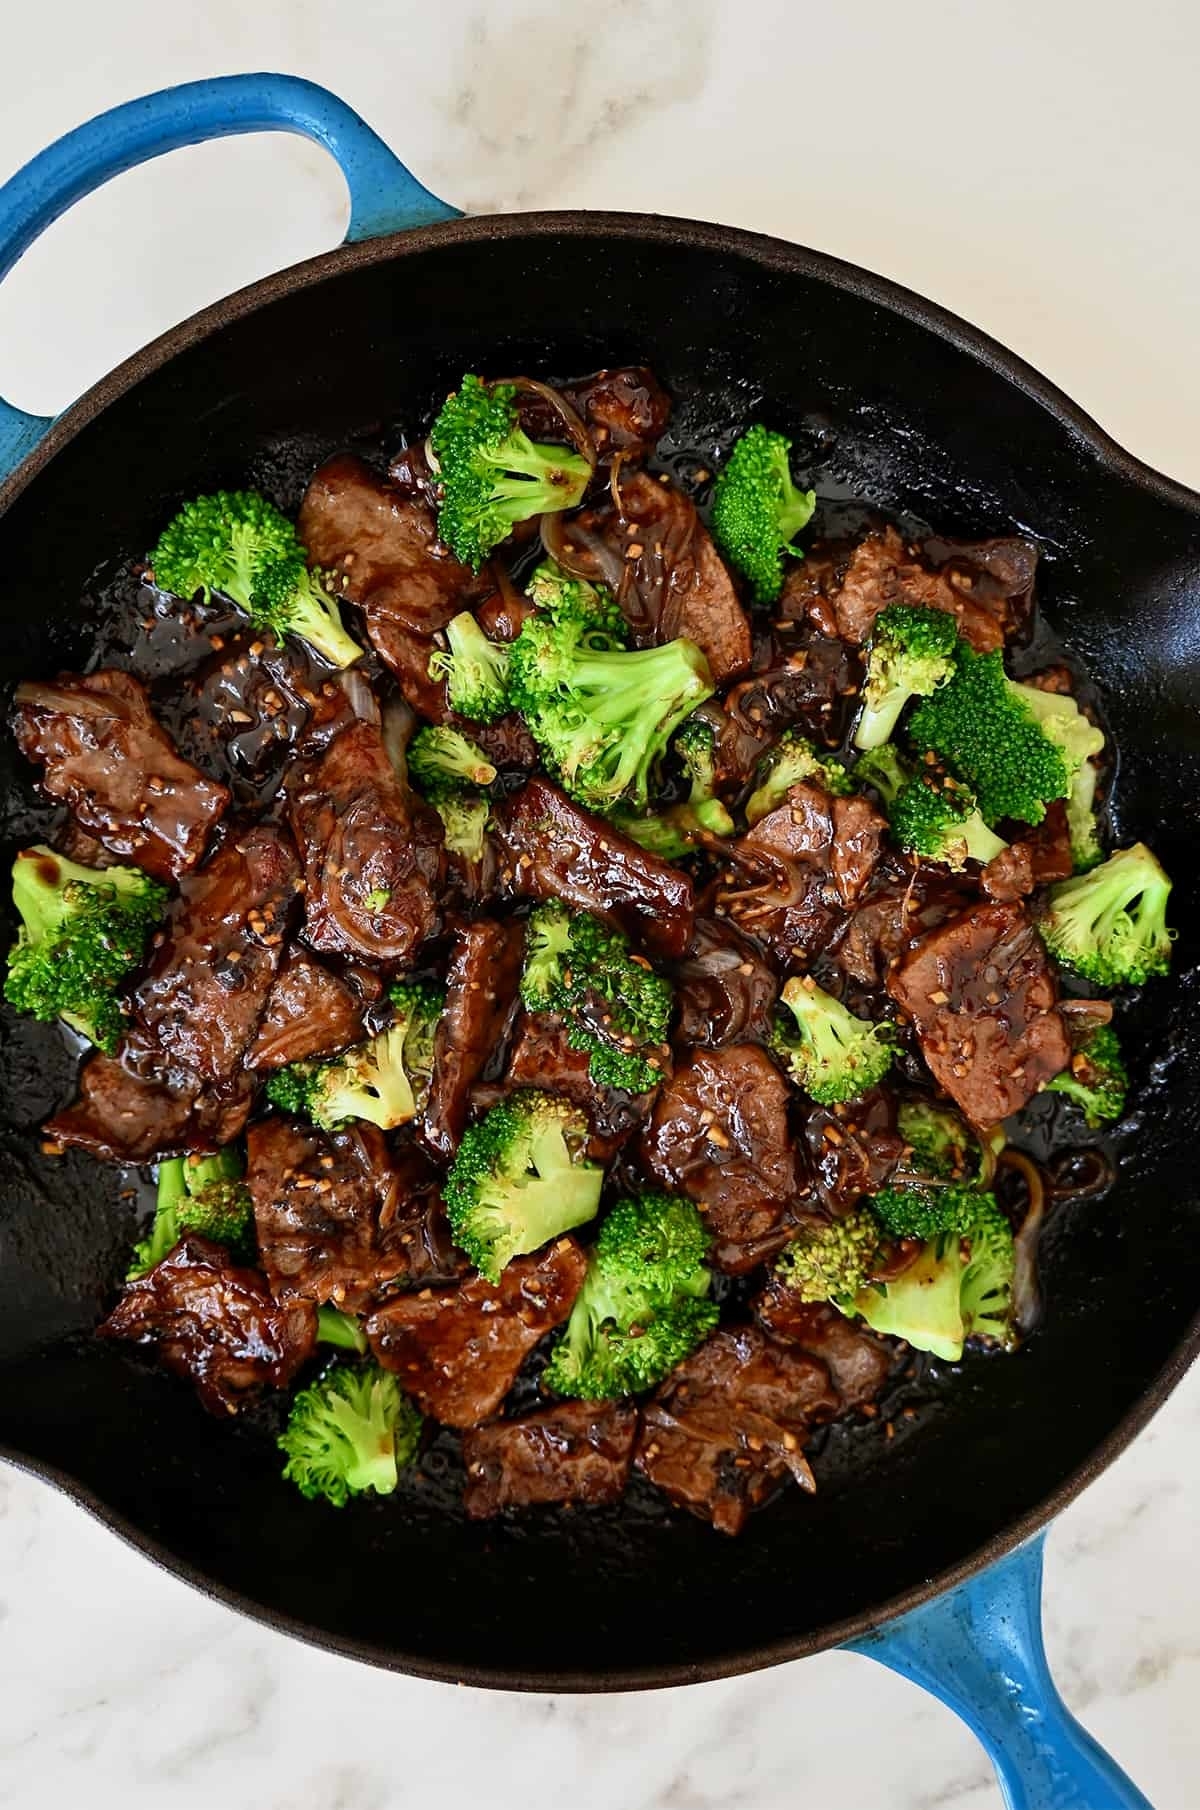 Skillet with beef and broccoli dish, cooked and ready to serve